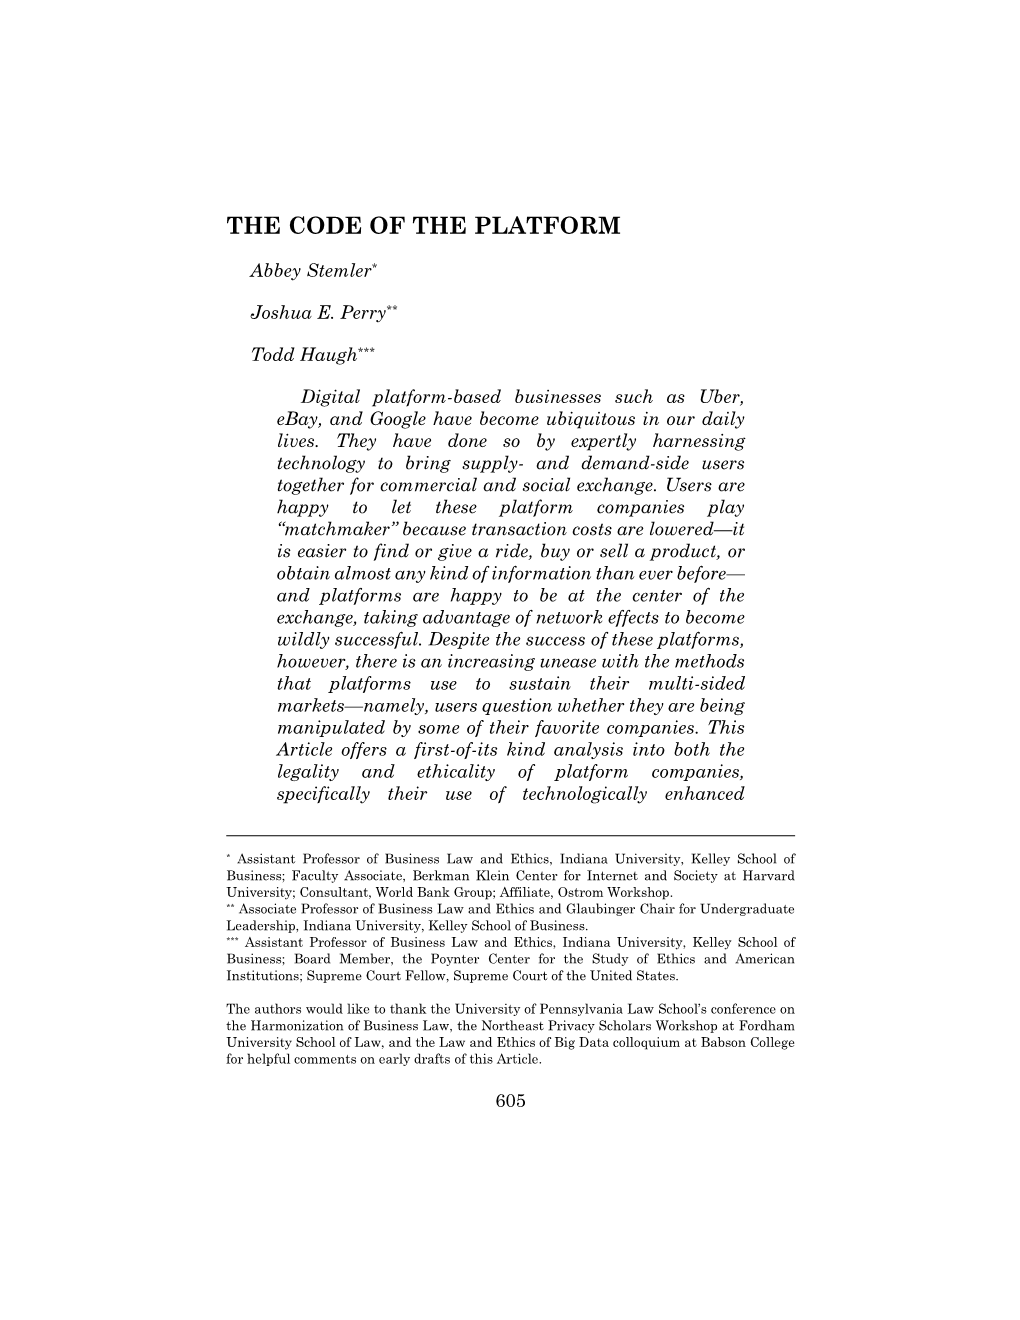 The Code of the Platform